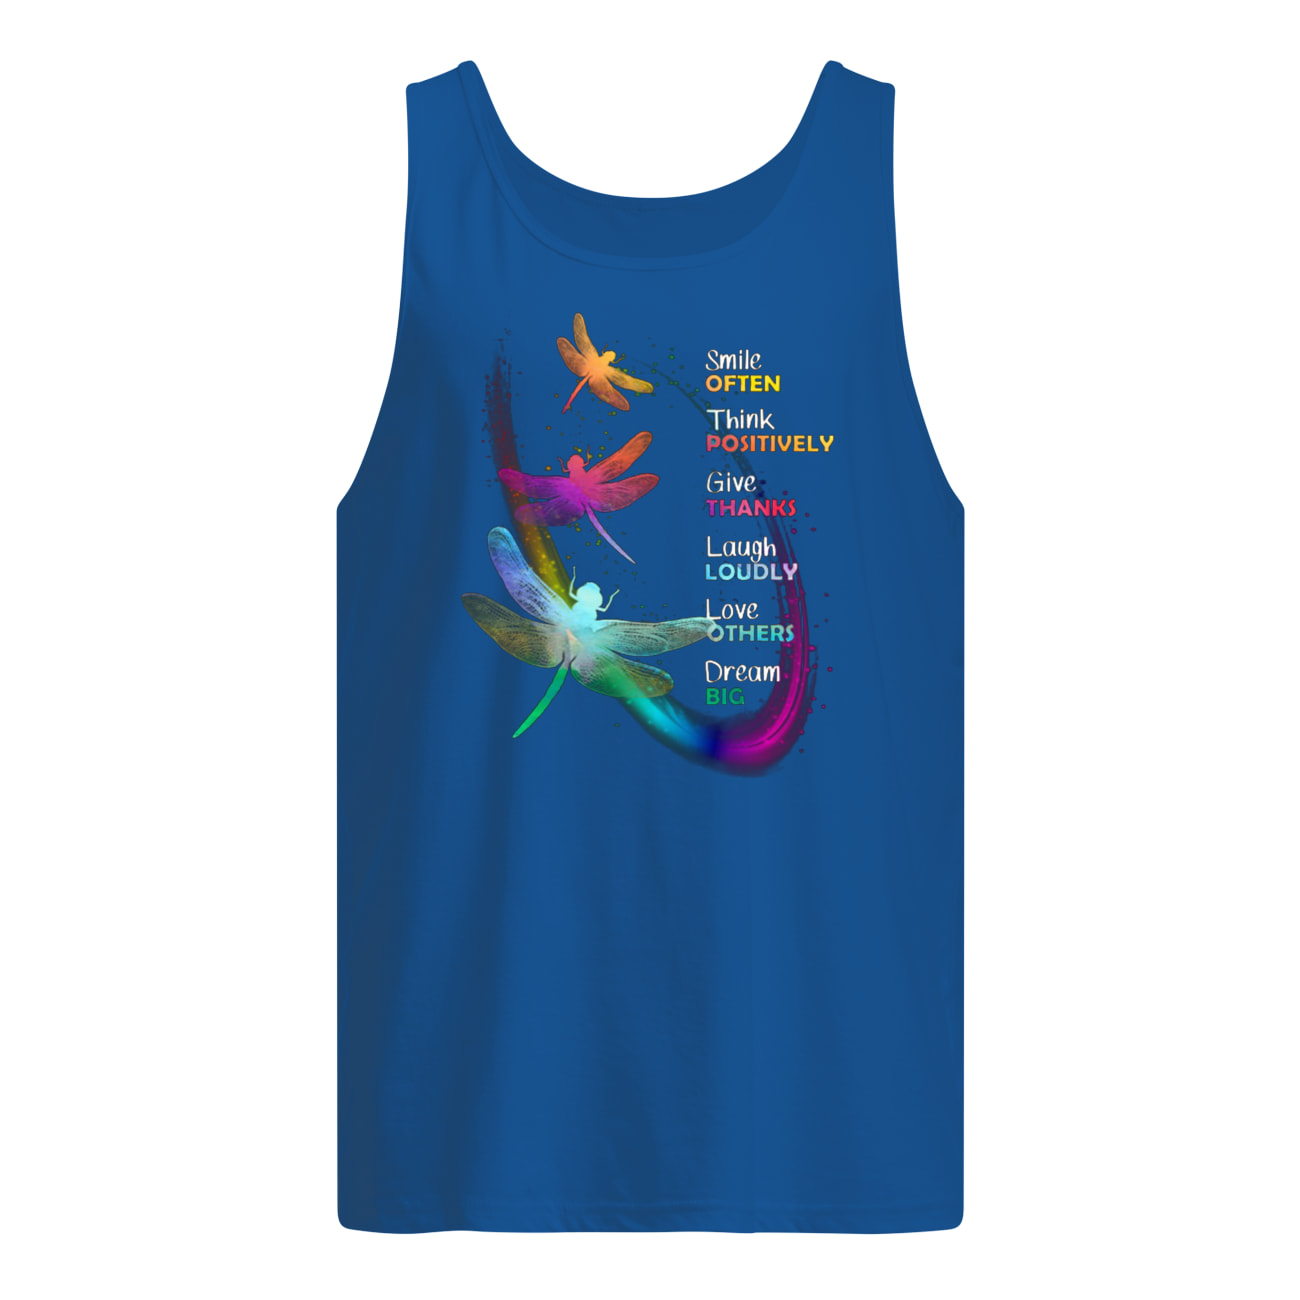 Dragonfly smile often think positively give thanks laugh loudly love others dream big tank top